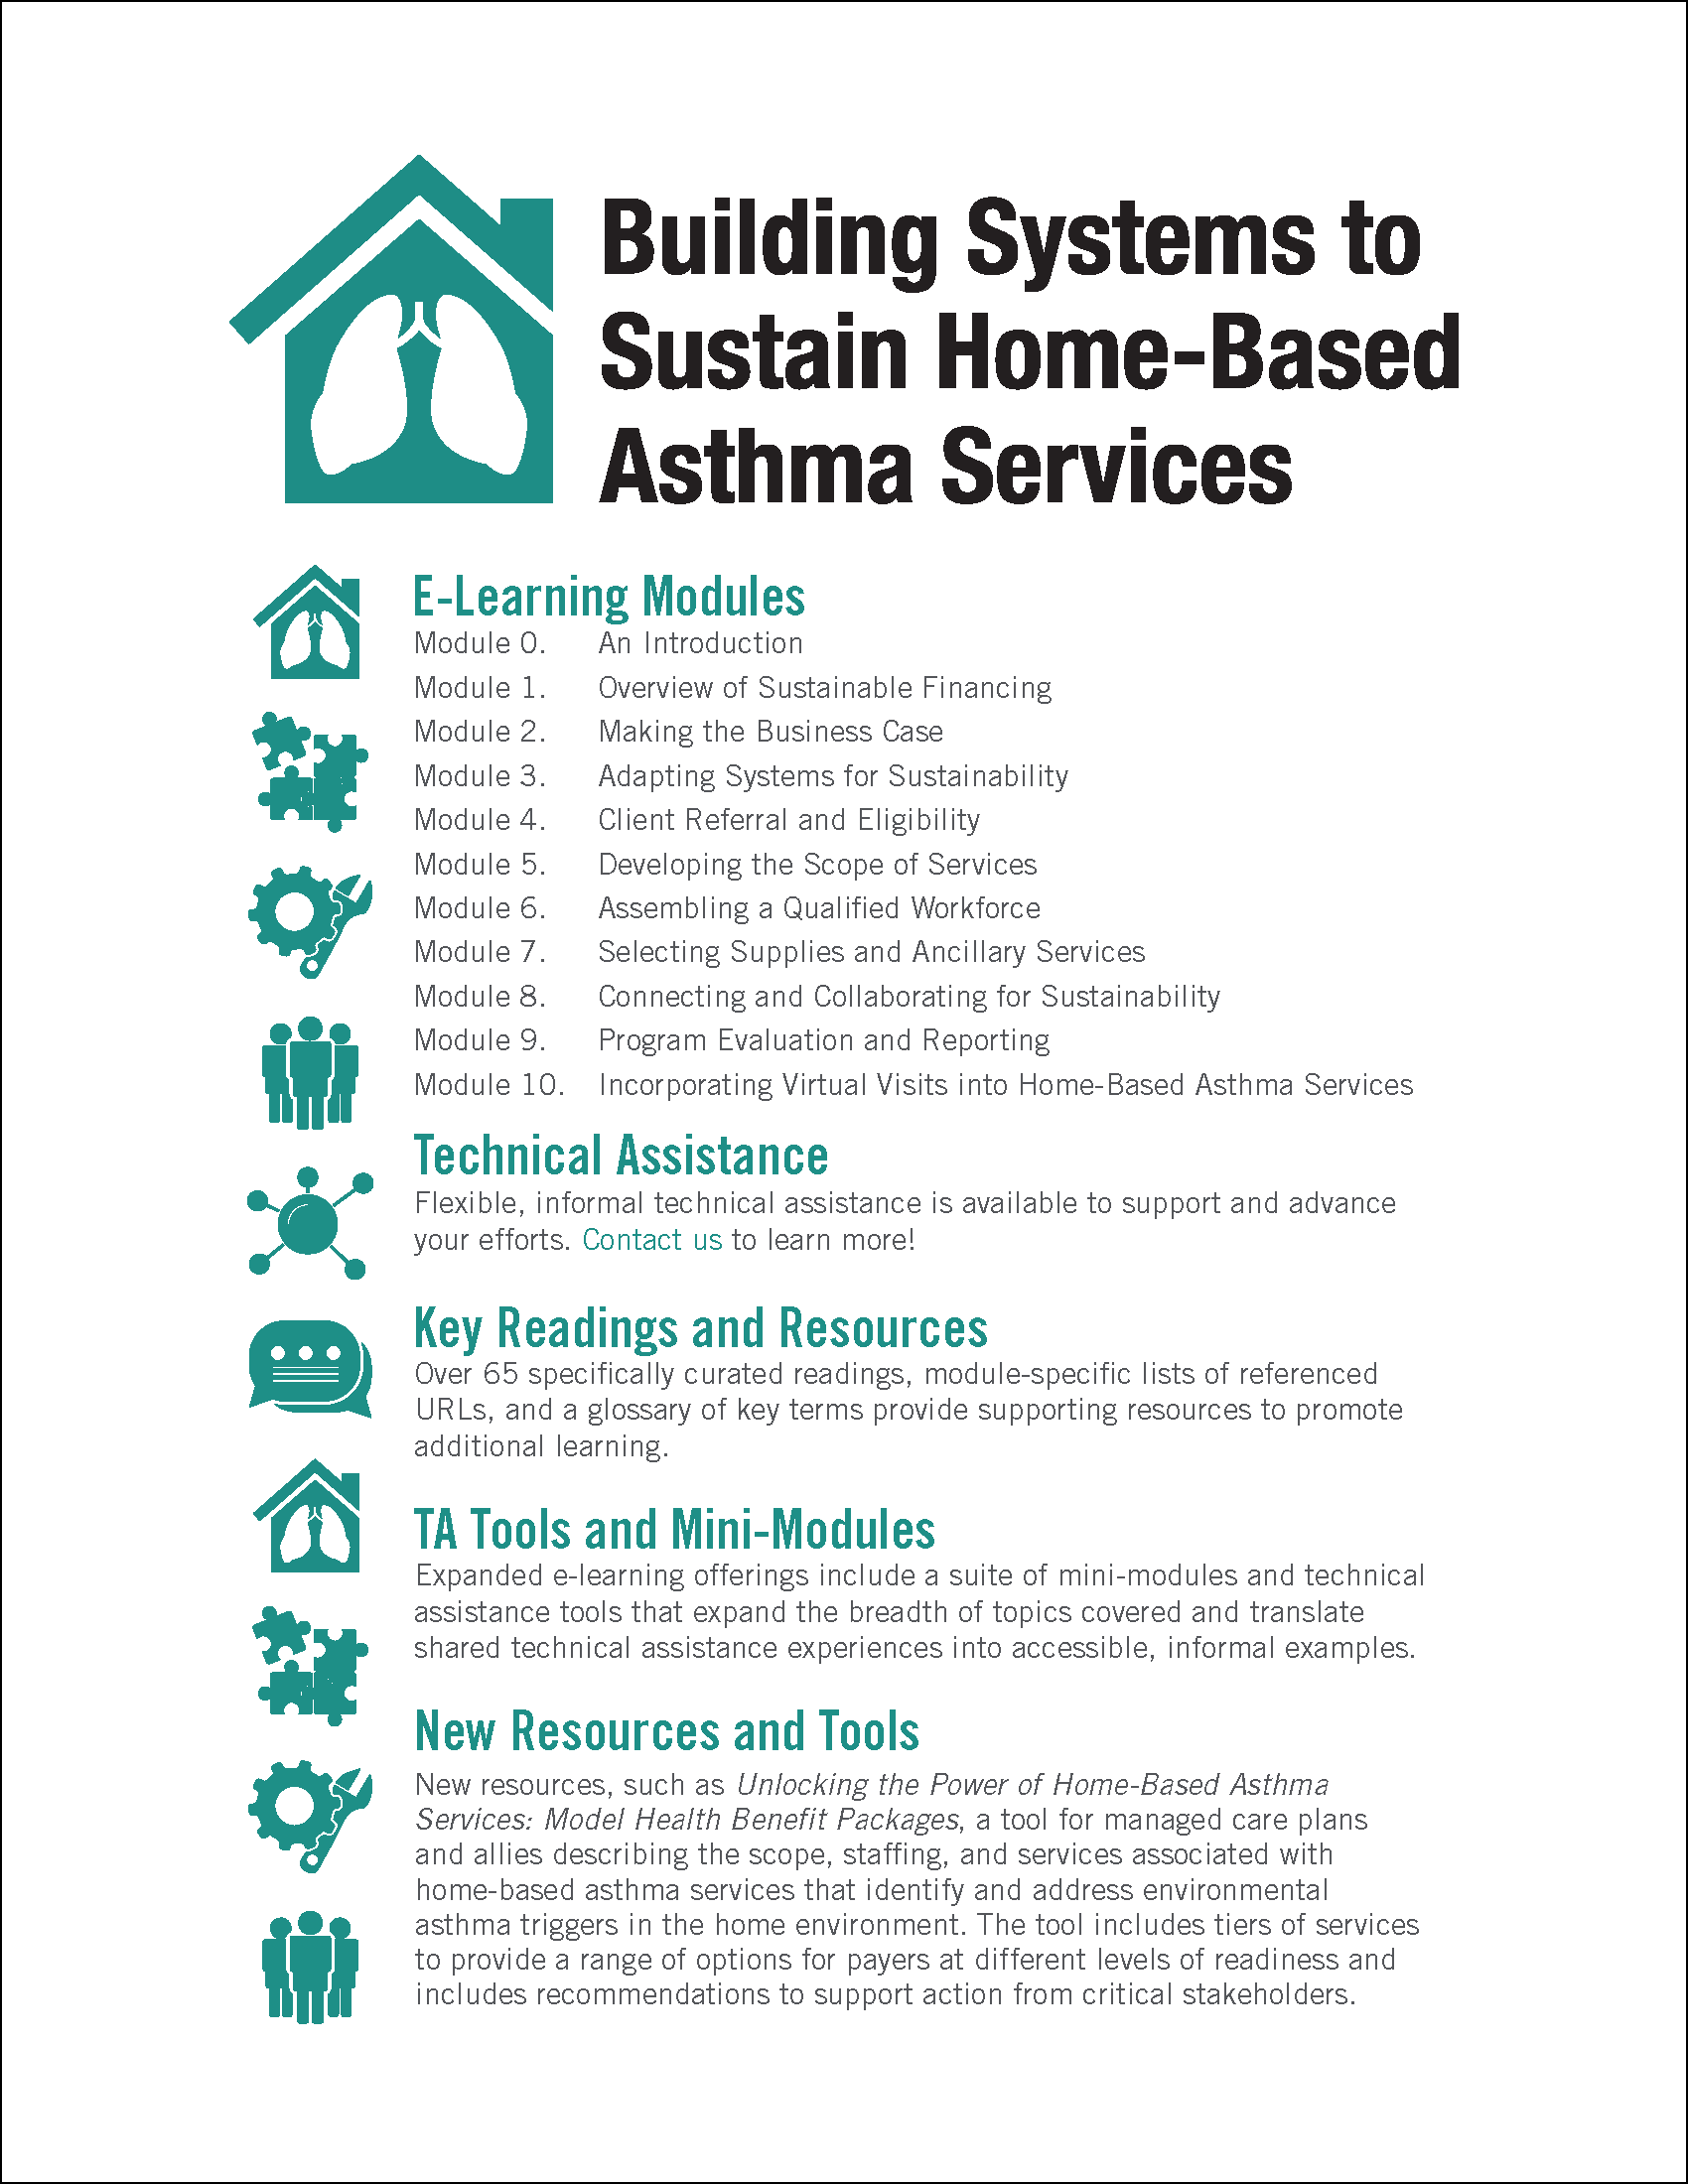 Building Systems to Sustain Home-Based Asthma Services